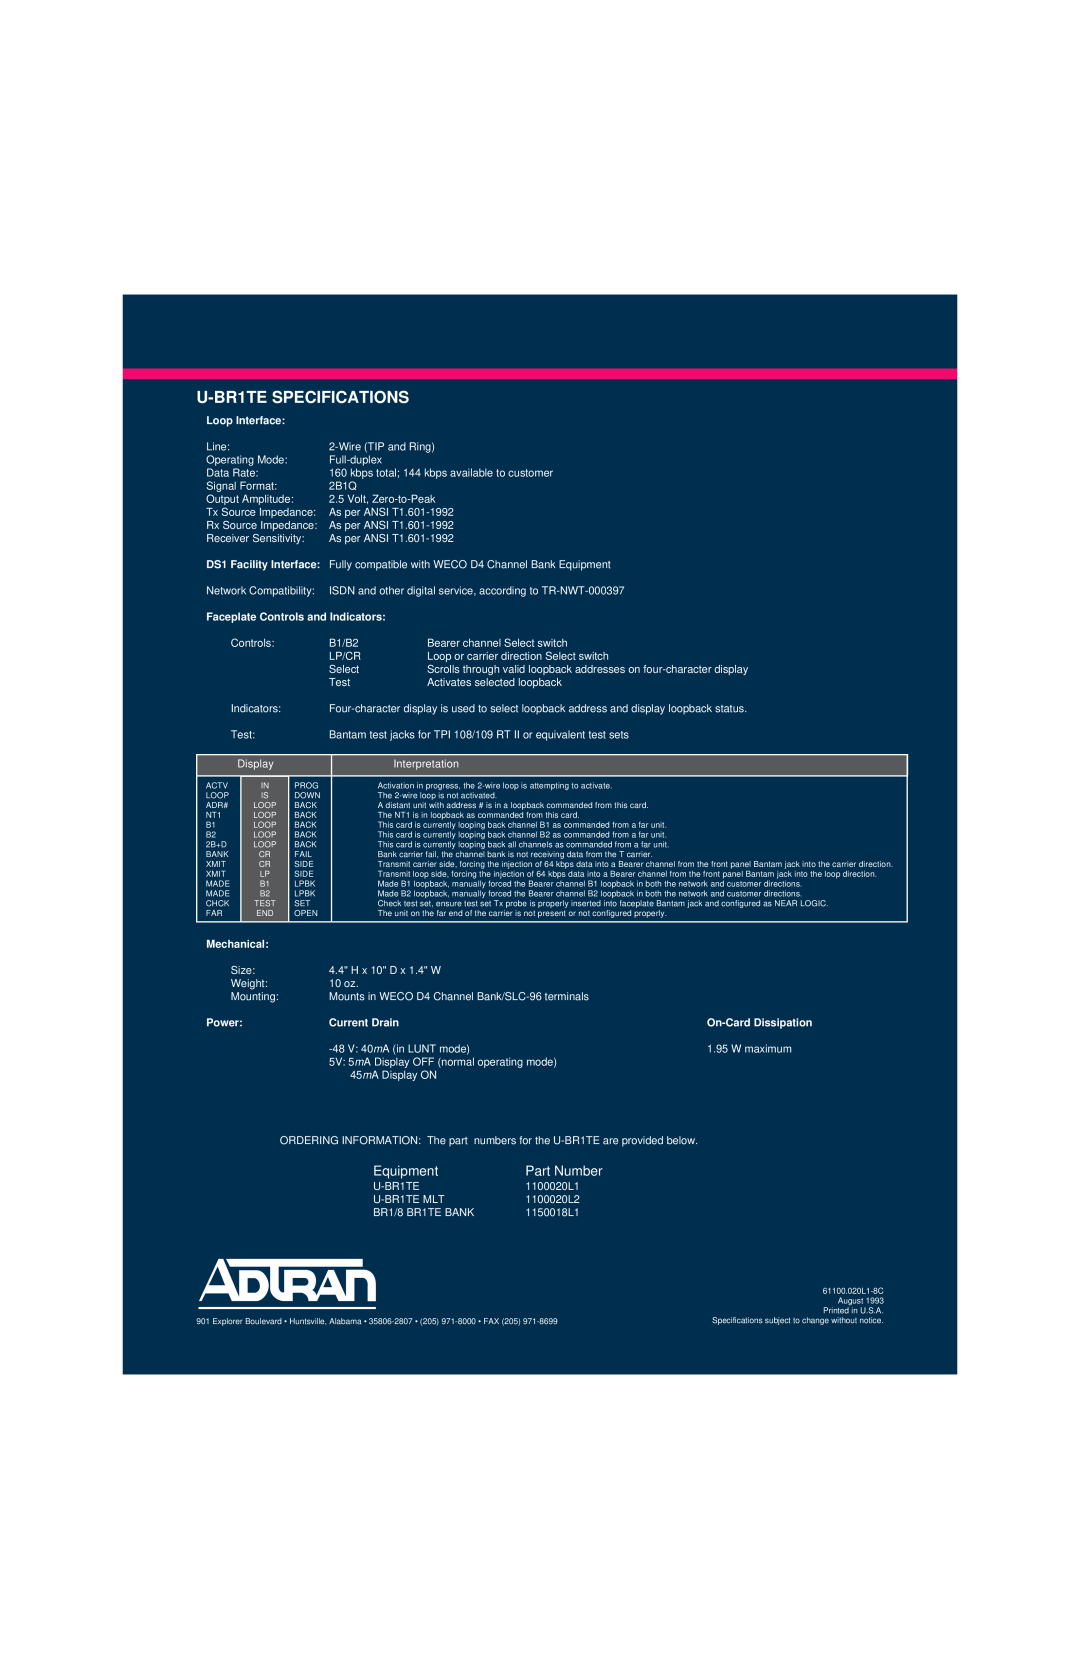 ADTRAN ISDN 2B1Q Equipment, Part Number, U-BR1TE SPECIFICATIONS, Loop Interface, DS1 Facility Interface, Mechanical, Power 